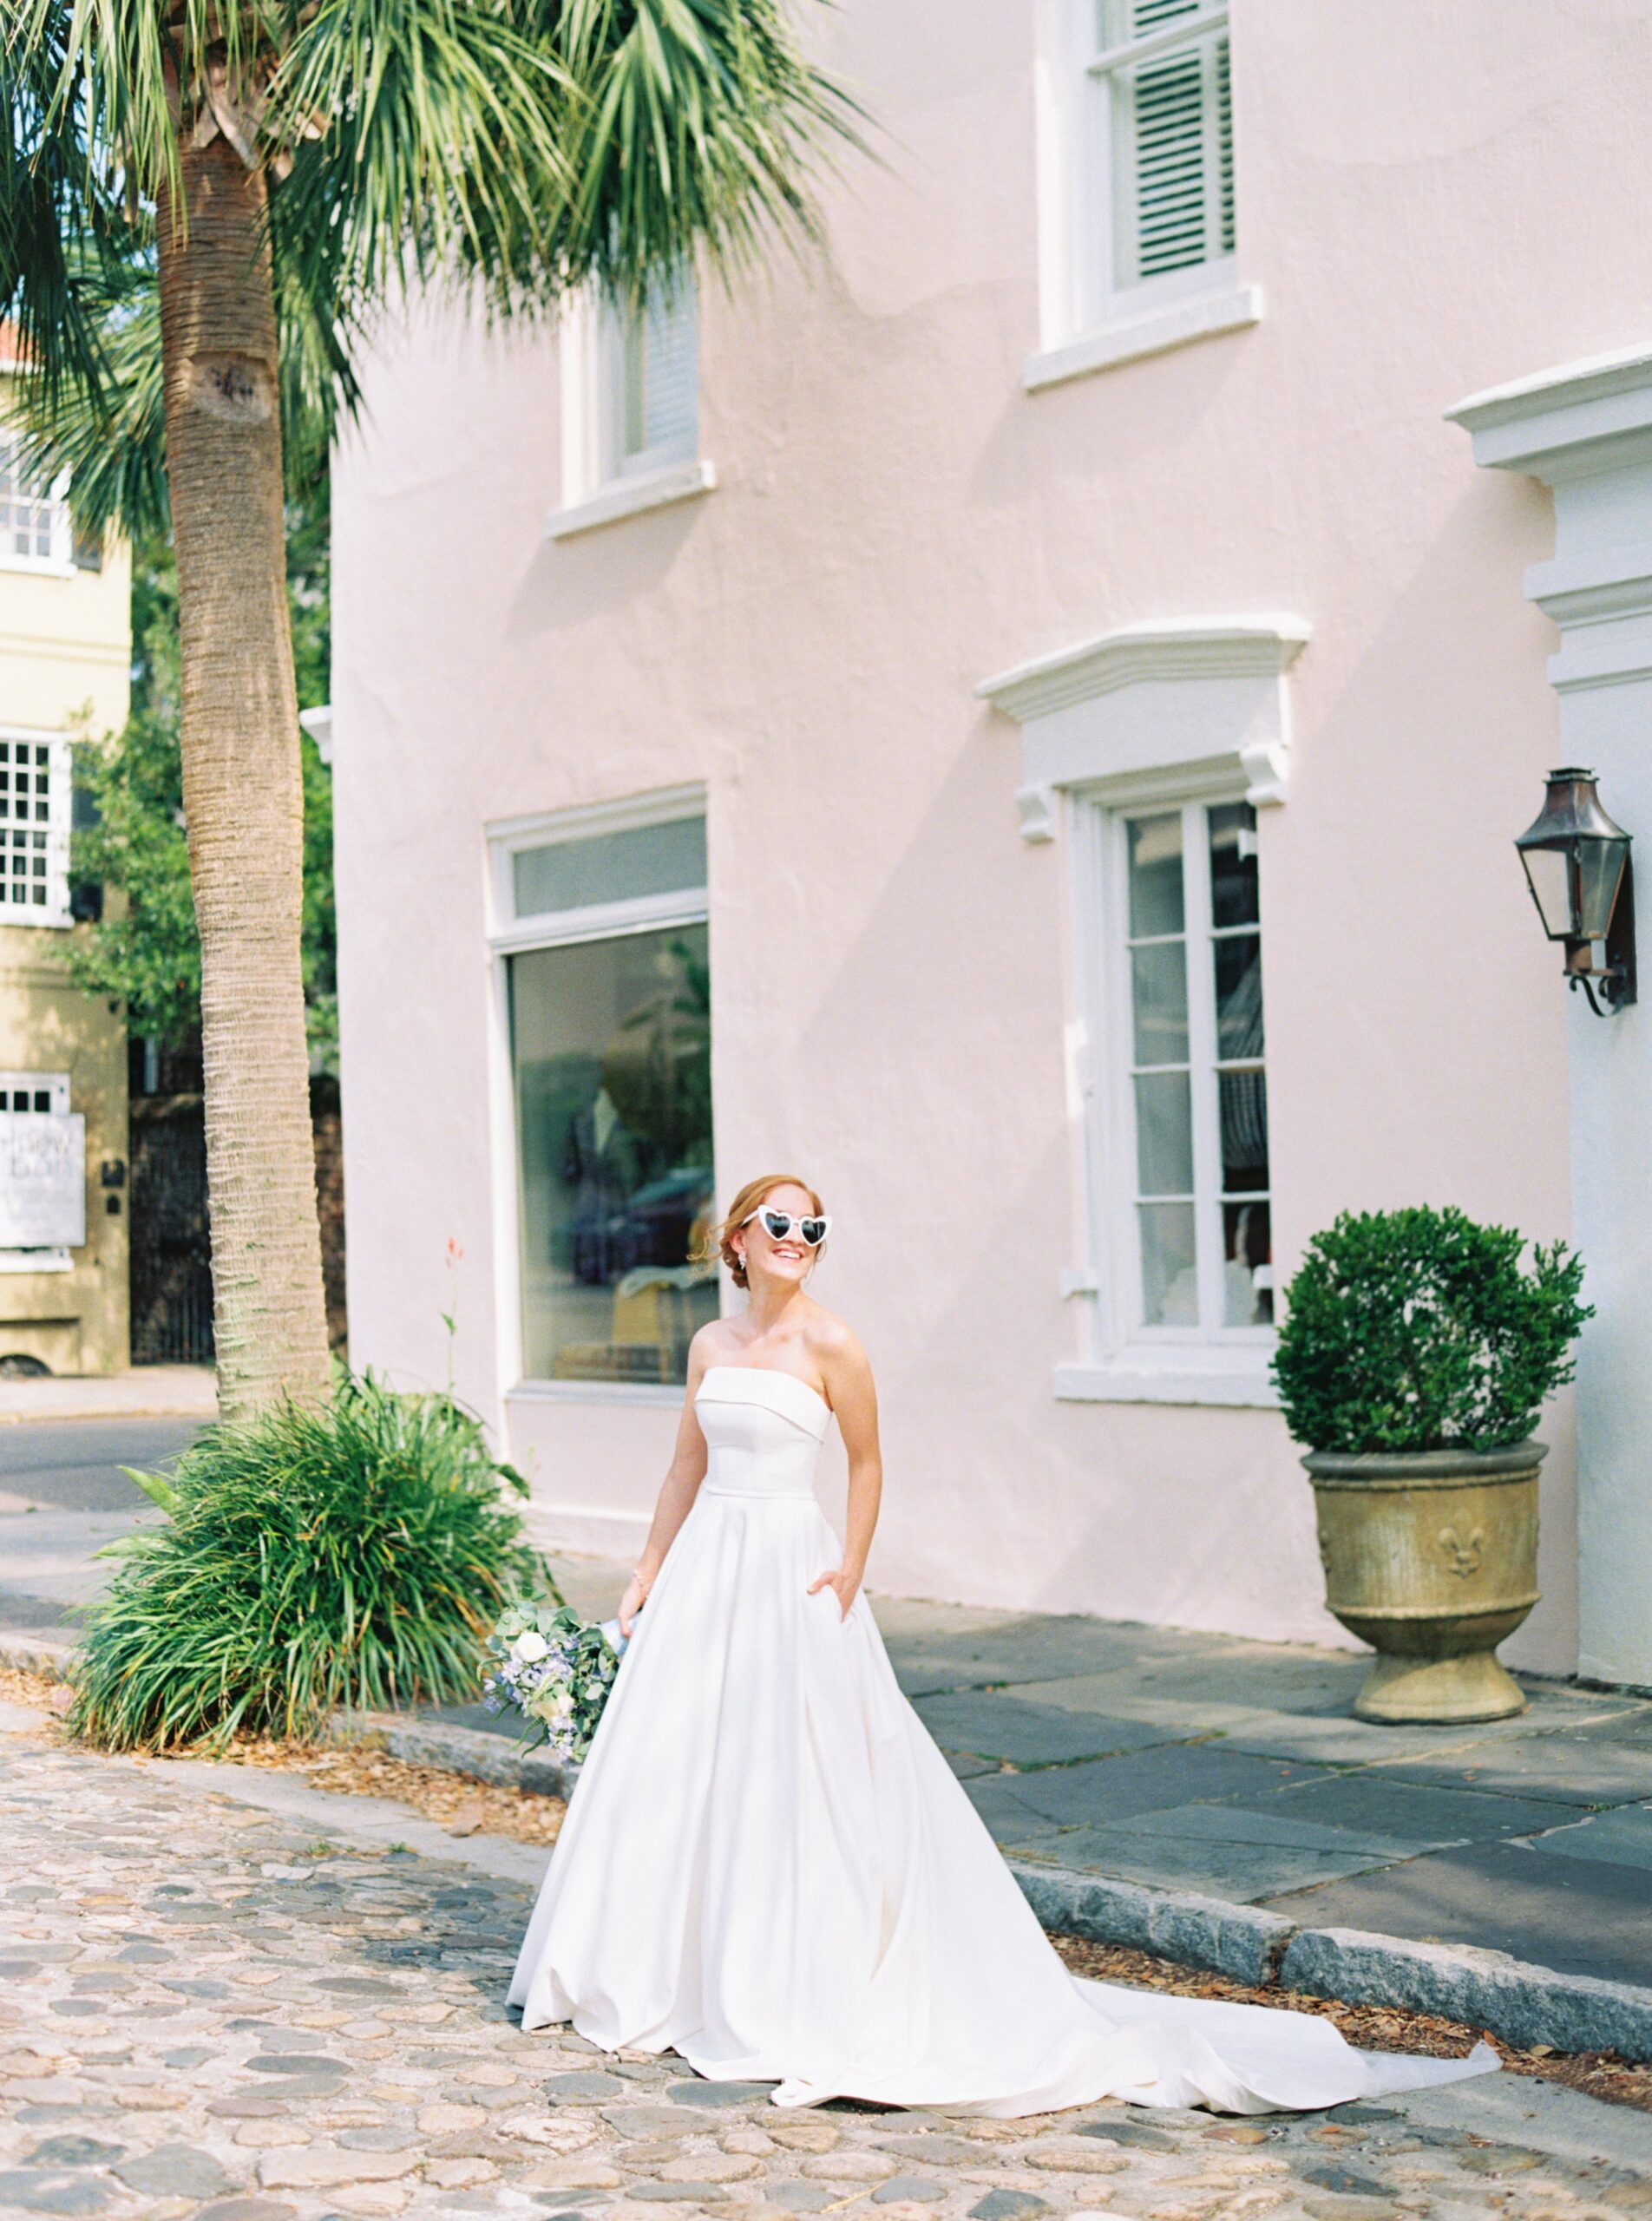 bride in strapless dress and heart shaped sunglasses standing on cobblestone street with pink wall and palm tree. top charleston wedding photographer. wedding dress with pockets.